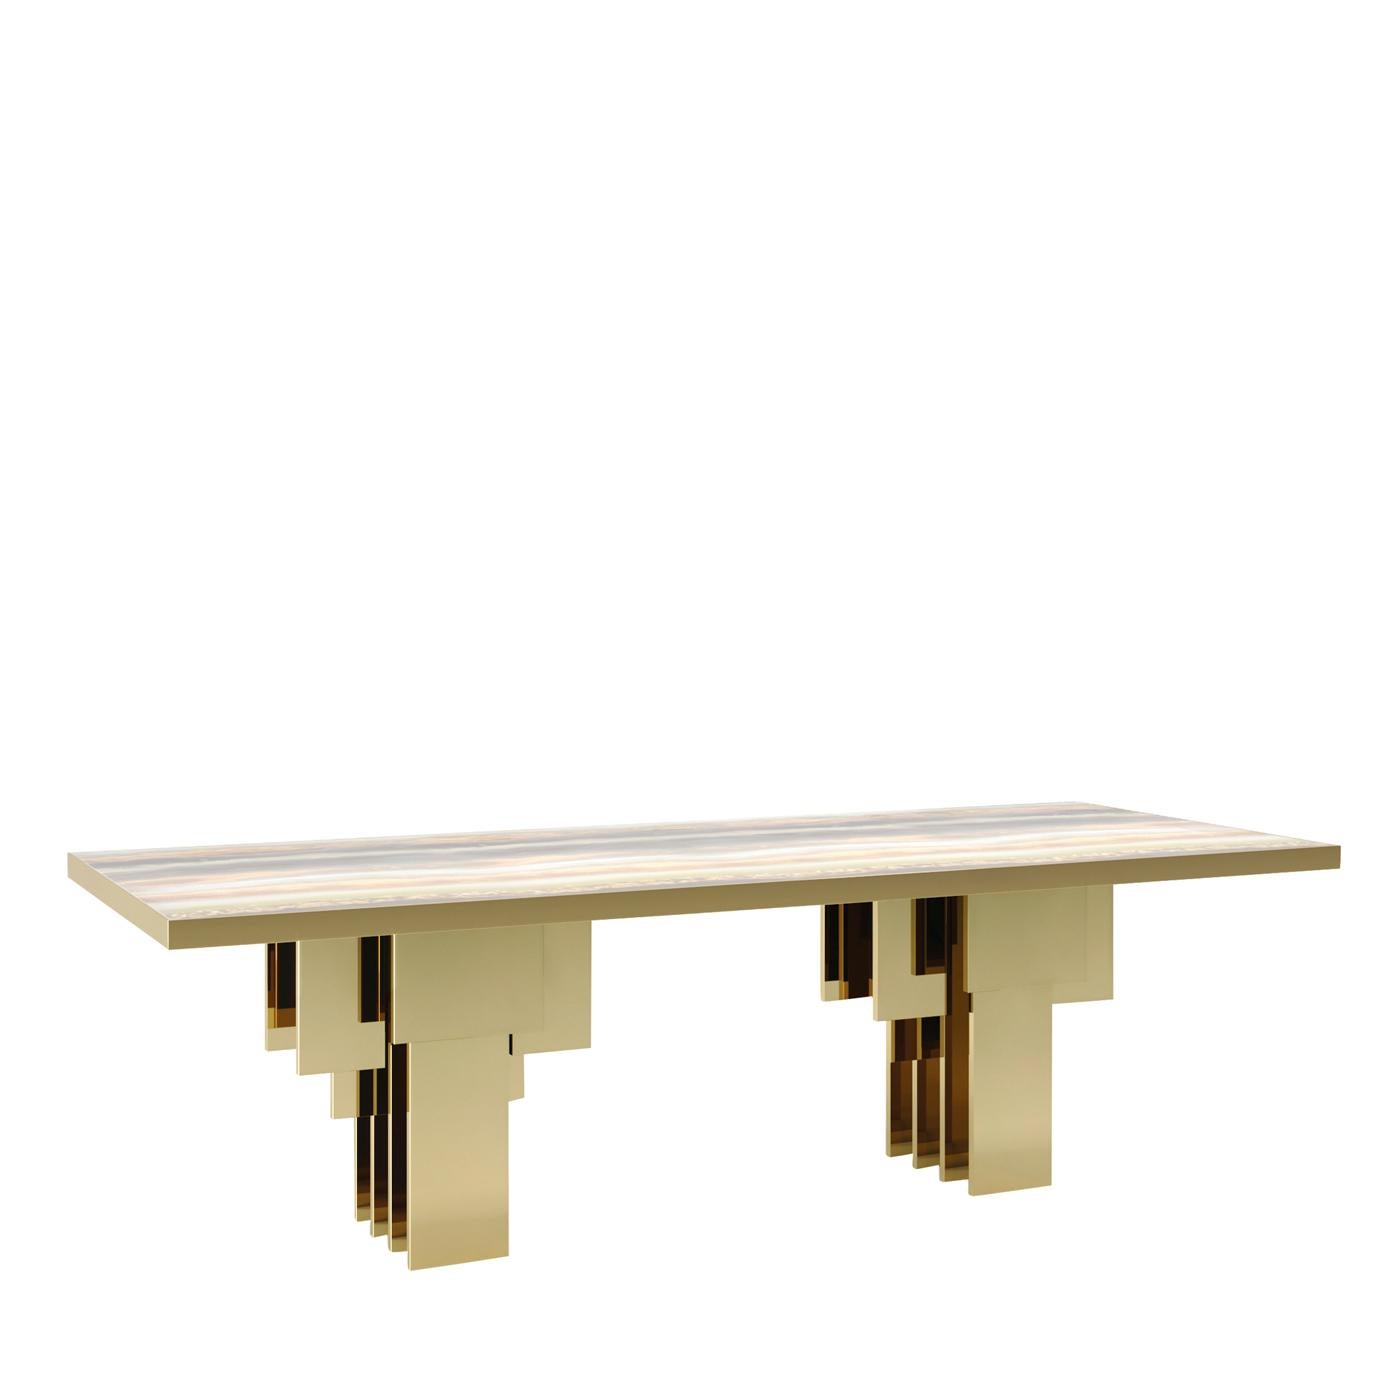 An exquisitely eccentric design characterizes this one-off dining table. Its top displays an inlaid wood structure that is widely customizable in other wood finishes or lacquers, while the support metal basement has a brass finish and comprises two